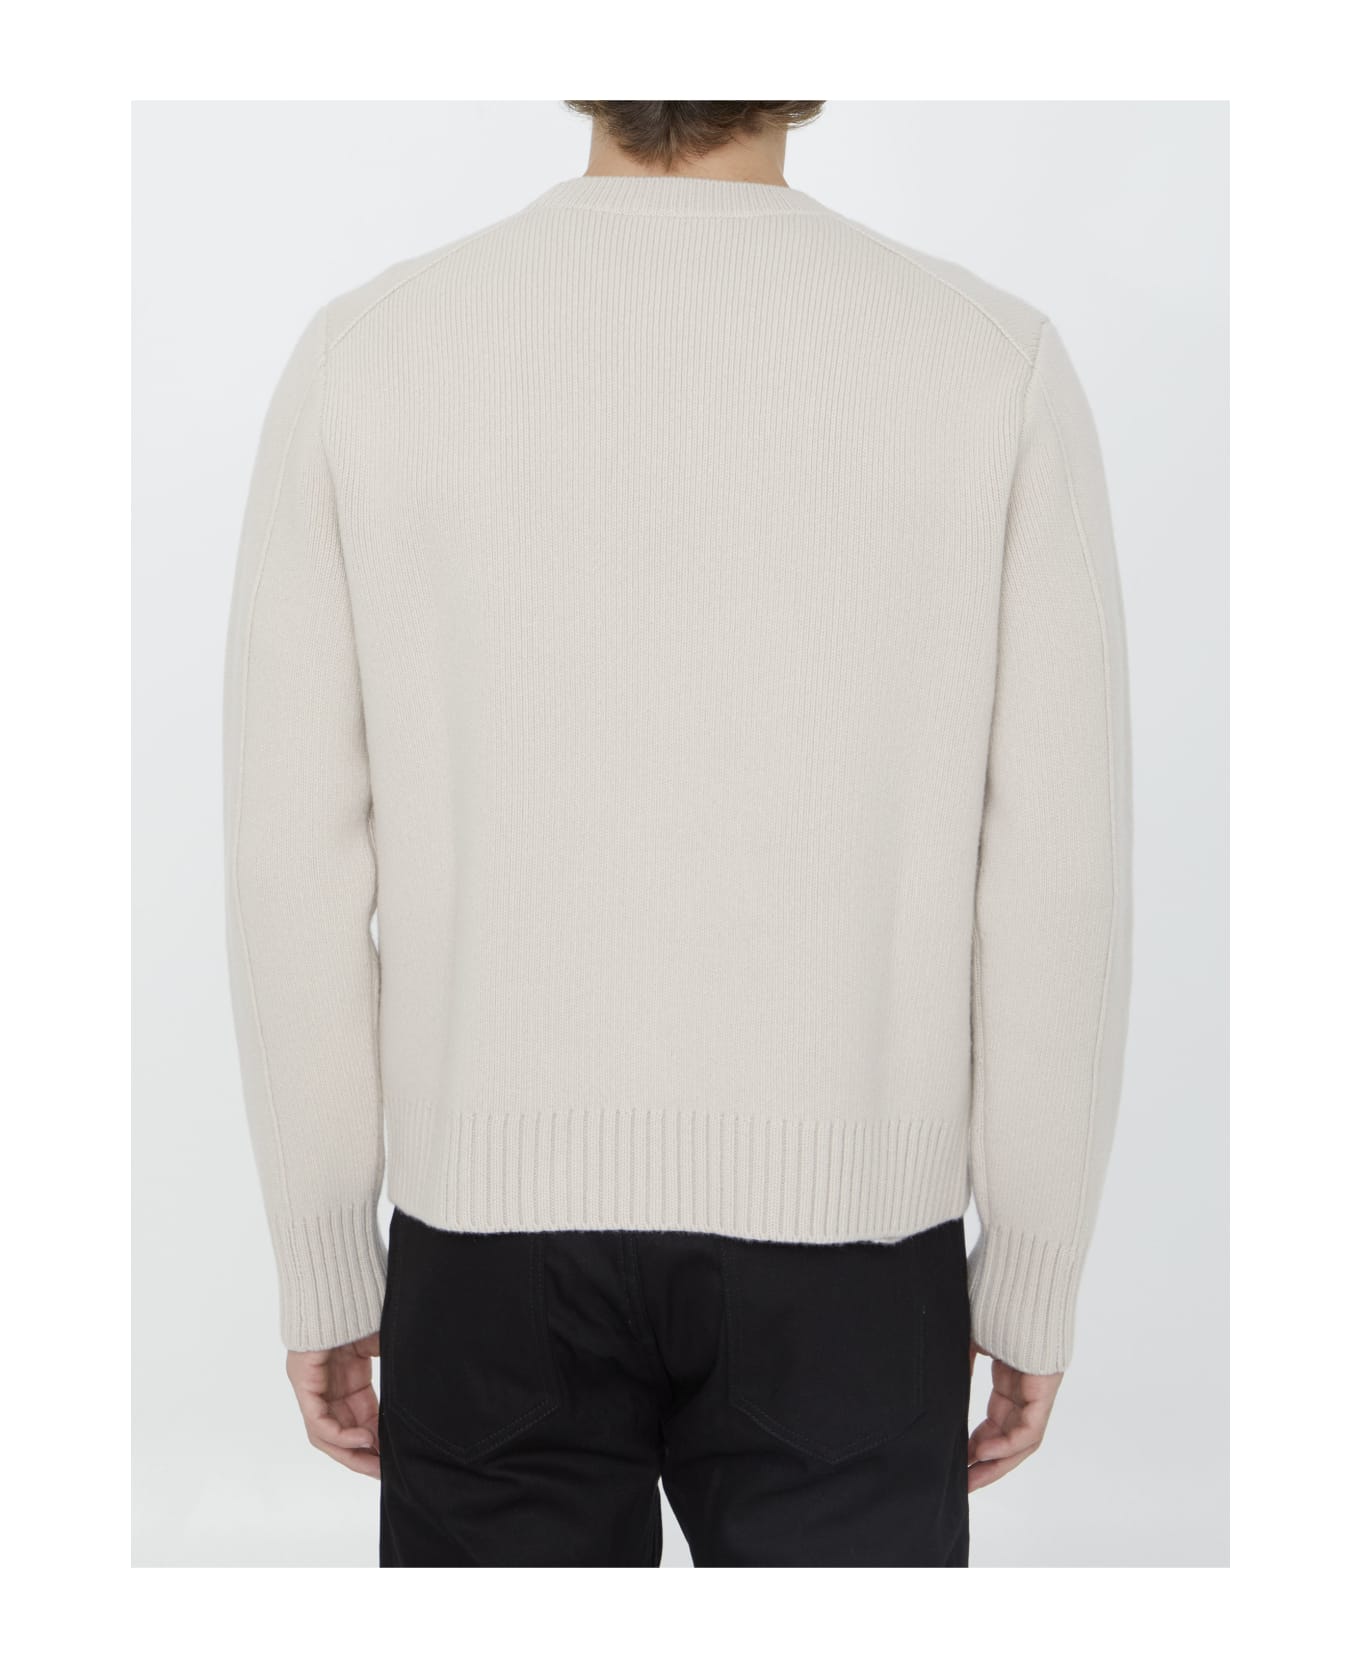 Lanvin Wool And Cashmere Sweater - PAPER ニットウェア